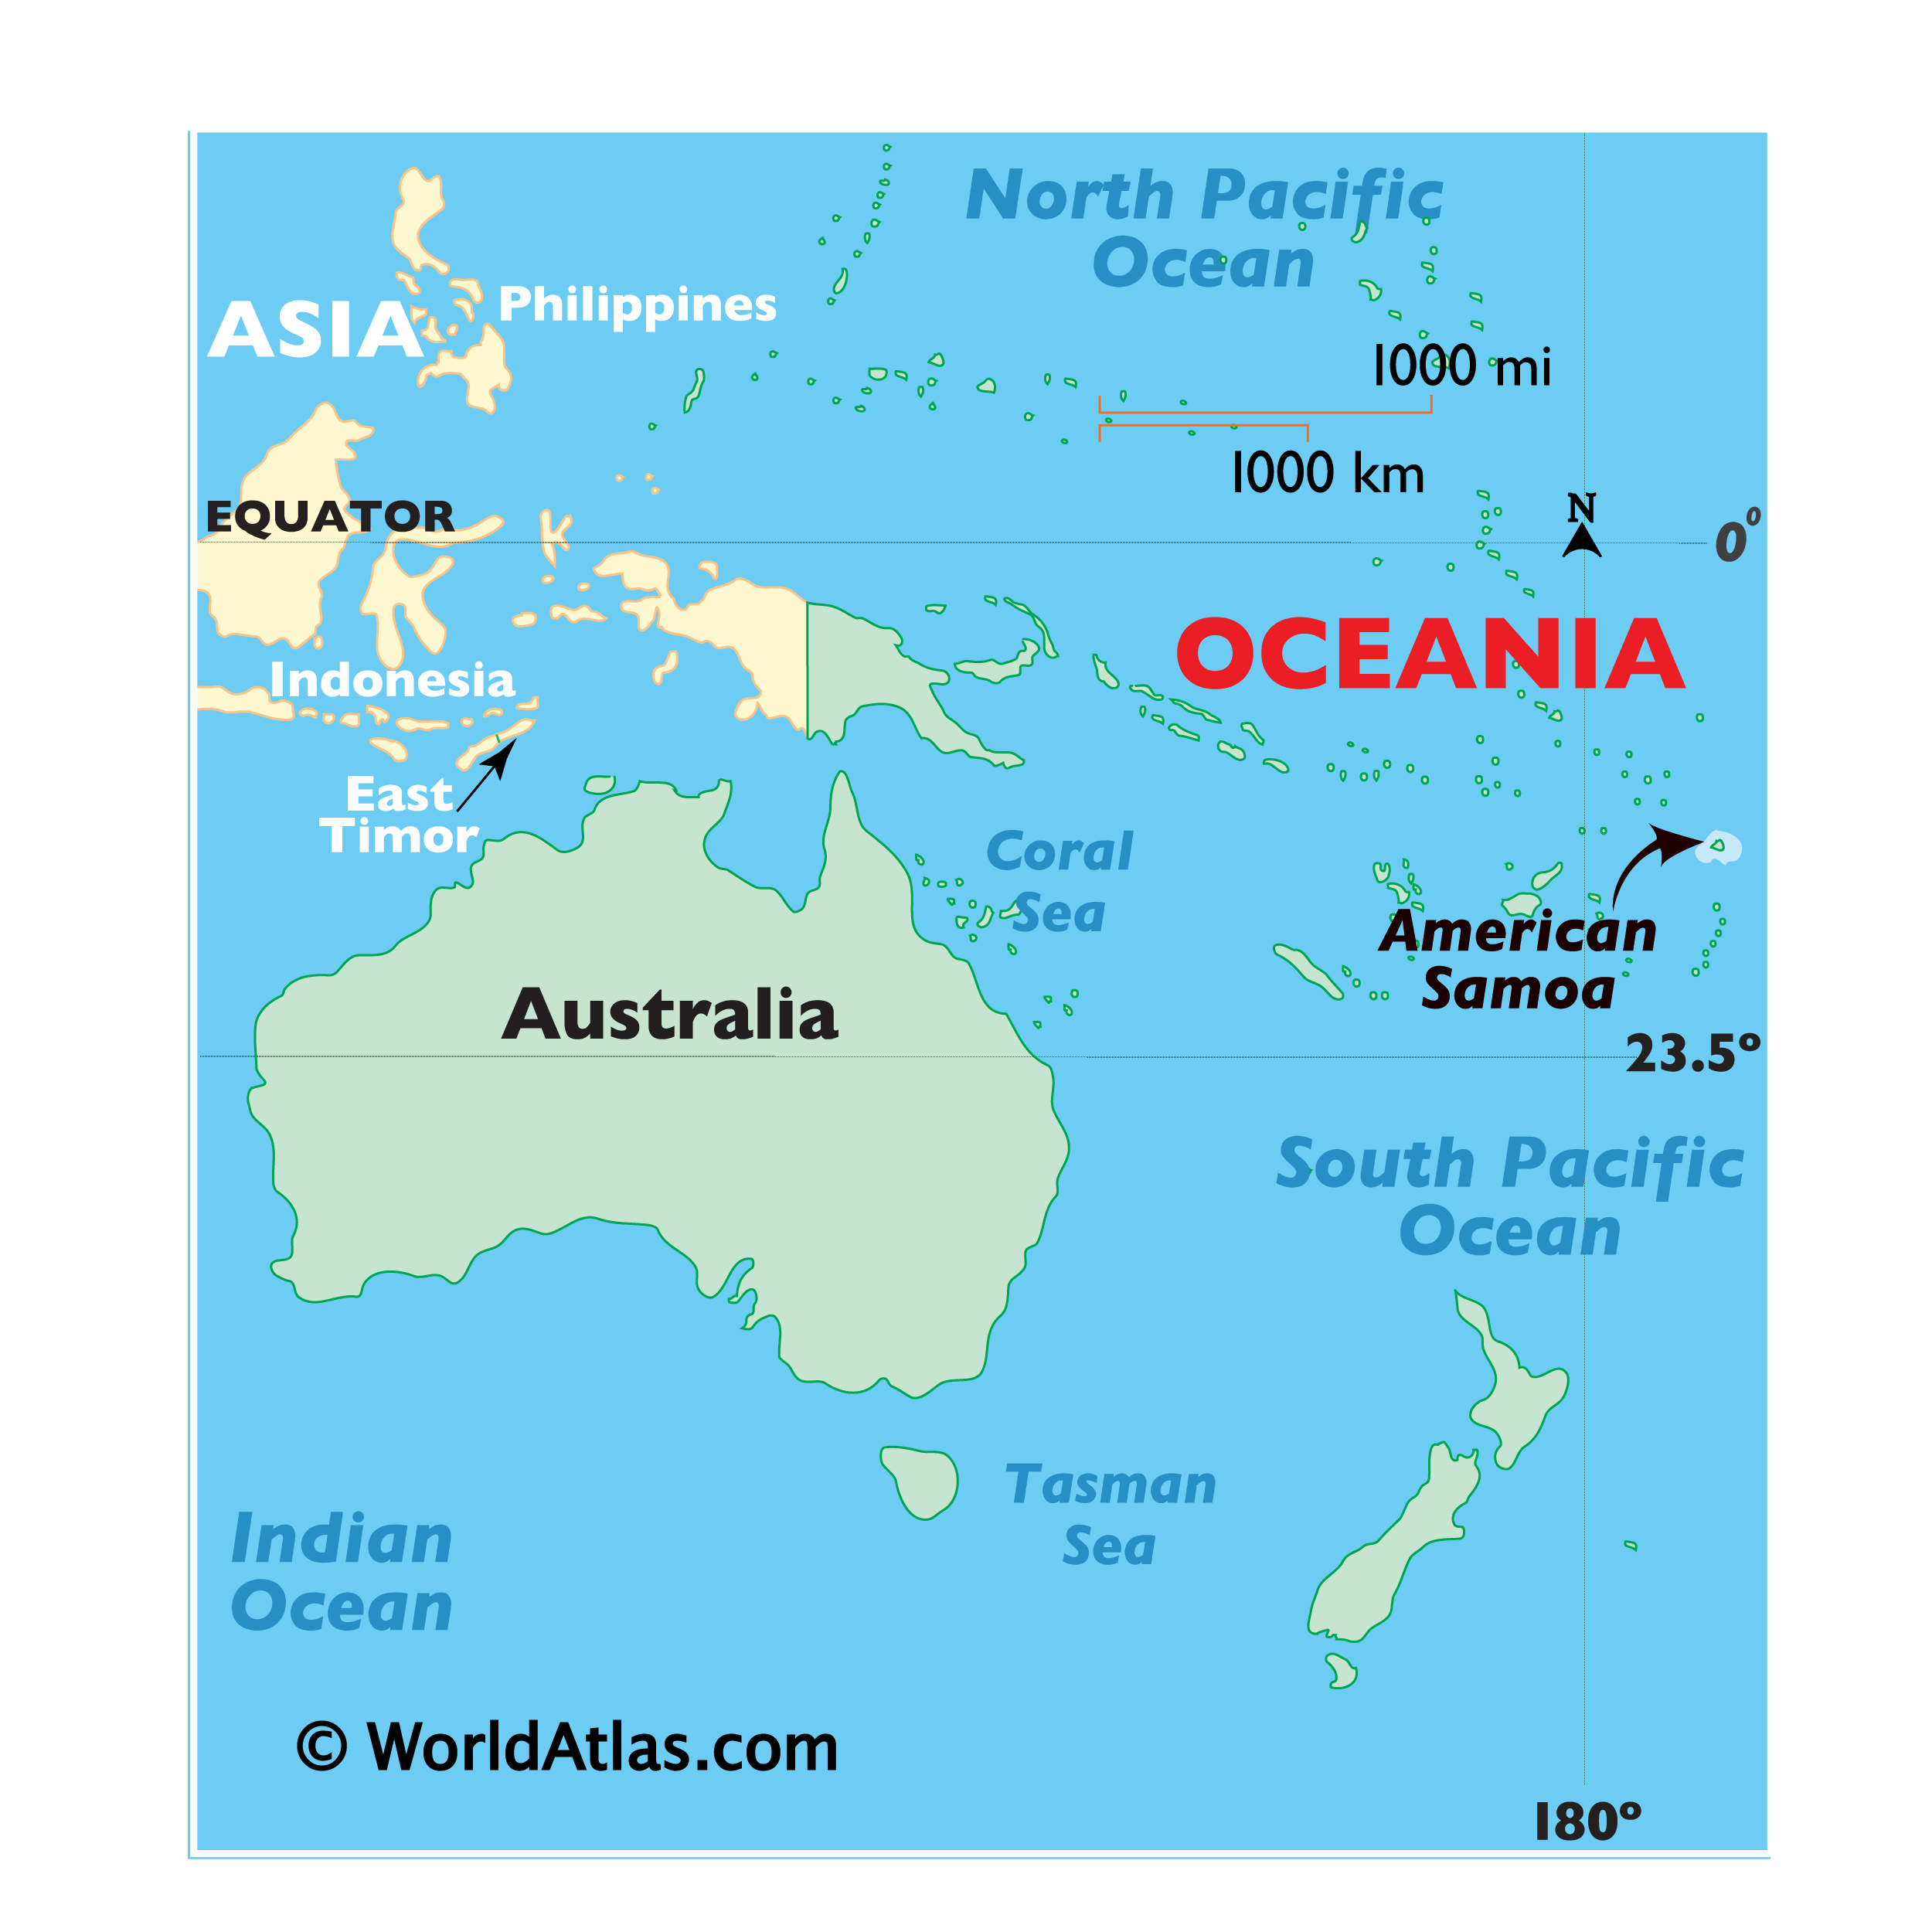 Where Are The Marshall Islands On A World Map Marshall Islands Map / Geography of the Marshall Islands / Map of 